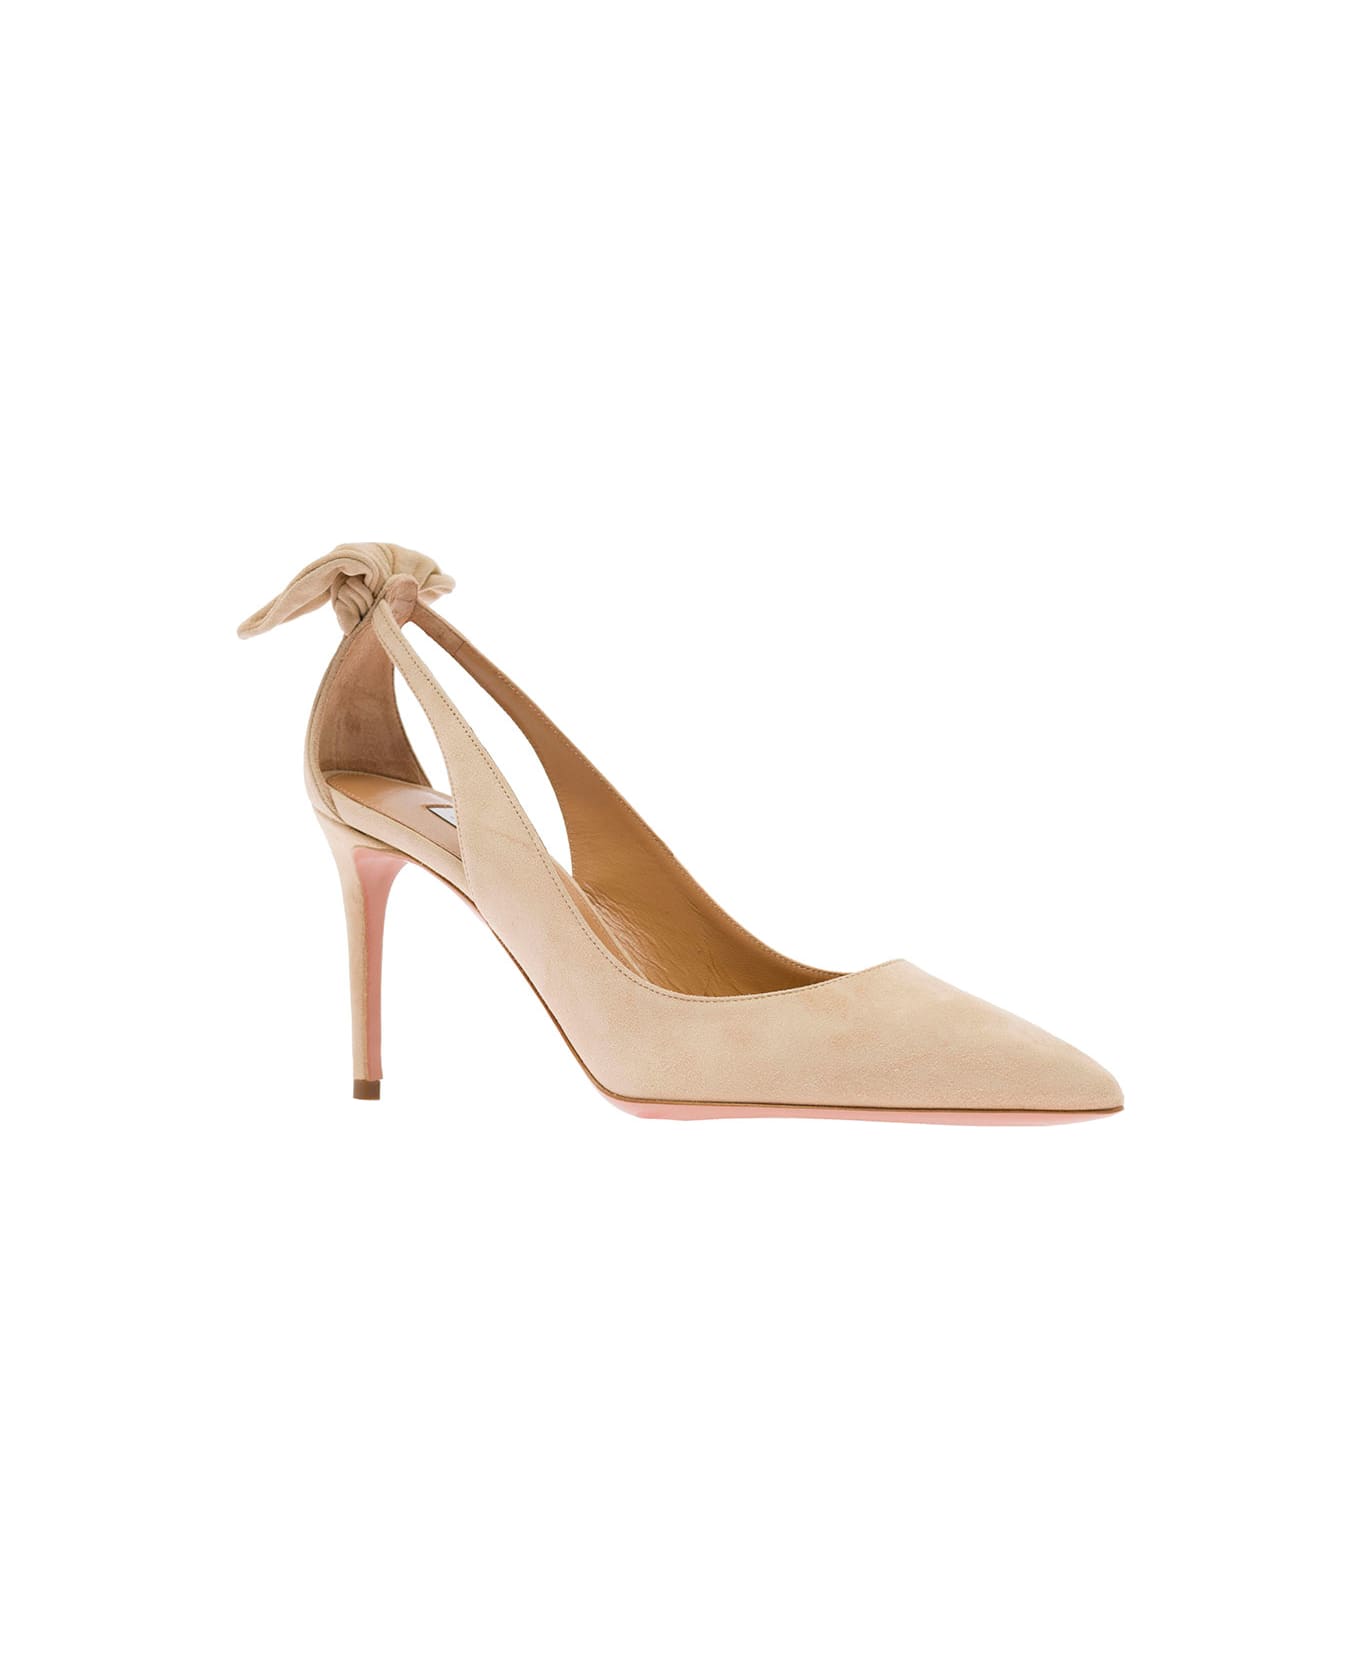 Aquazzura Pink Leather Pumps With Bow Detail - Beige